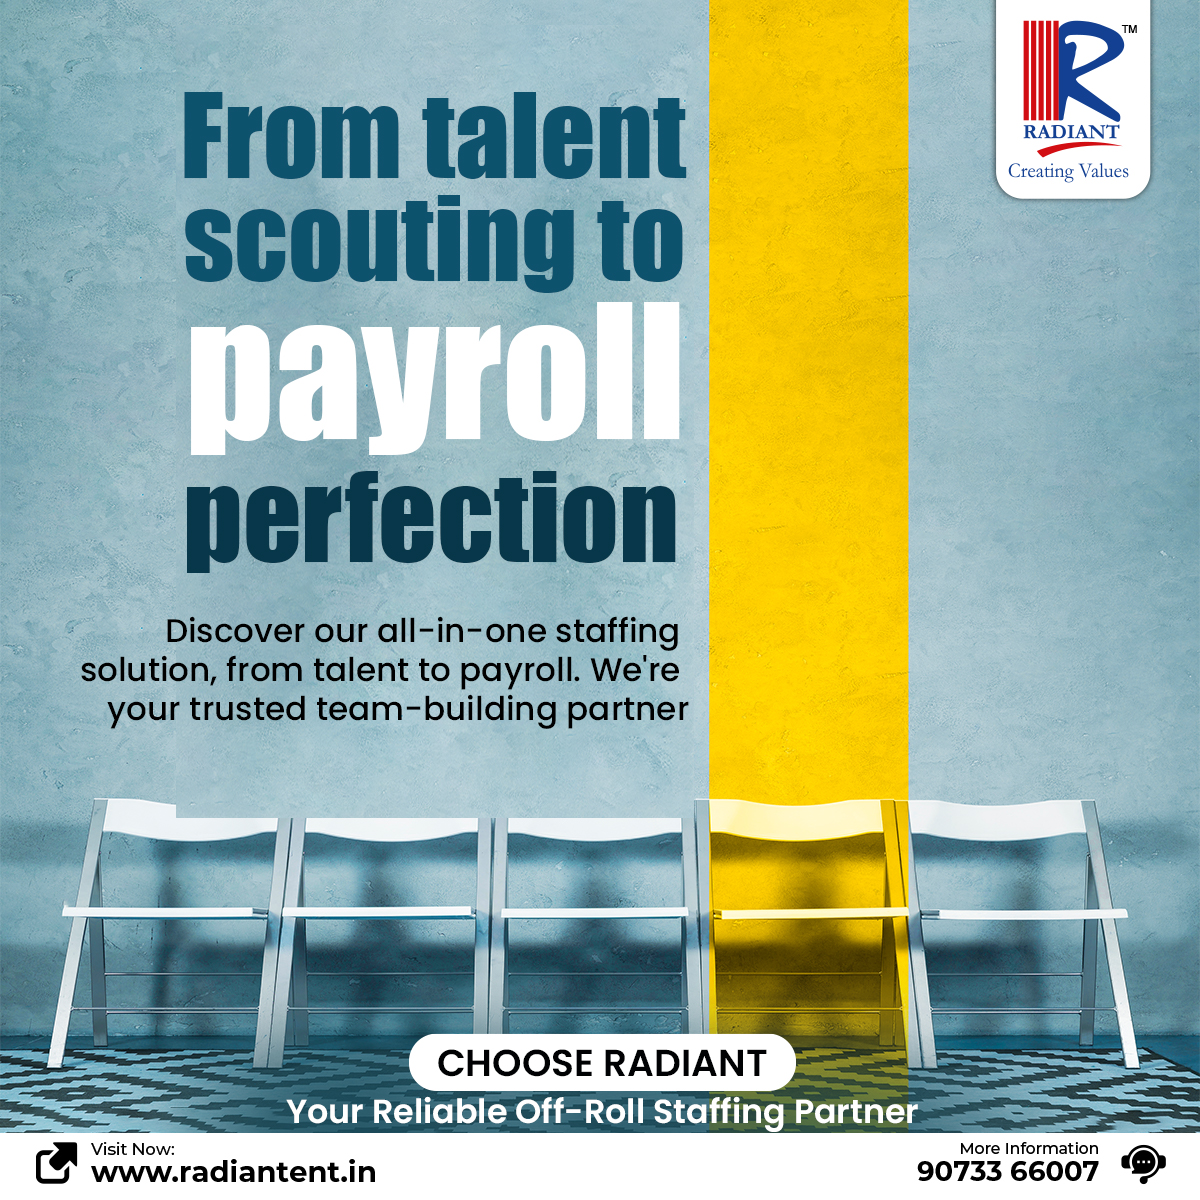 Optimize your hiring and payroll tasks with Radiant. We offer seamless services, from talent acquisition to precise payroll execution. 

Visit Us: radiantent.in
Call Us: 9073366007
.
.
.
#PayrollEfficiency #TalentAcquisition #SeamlessServices #StaffingSolutions